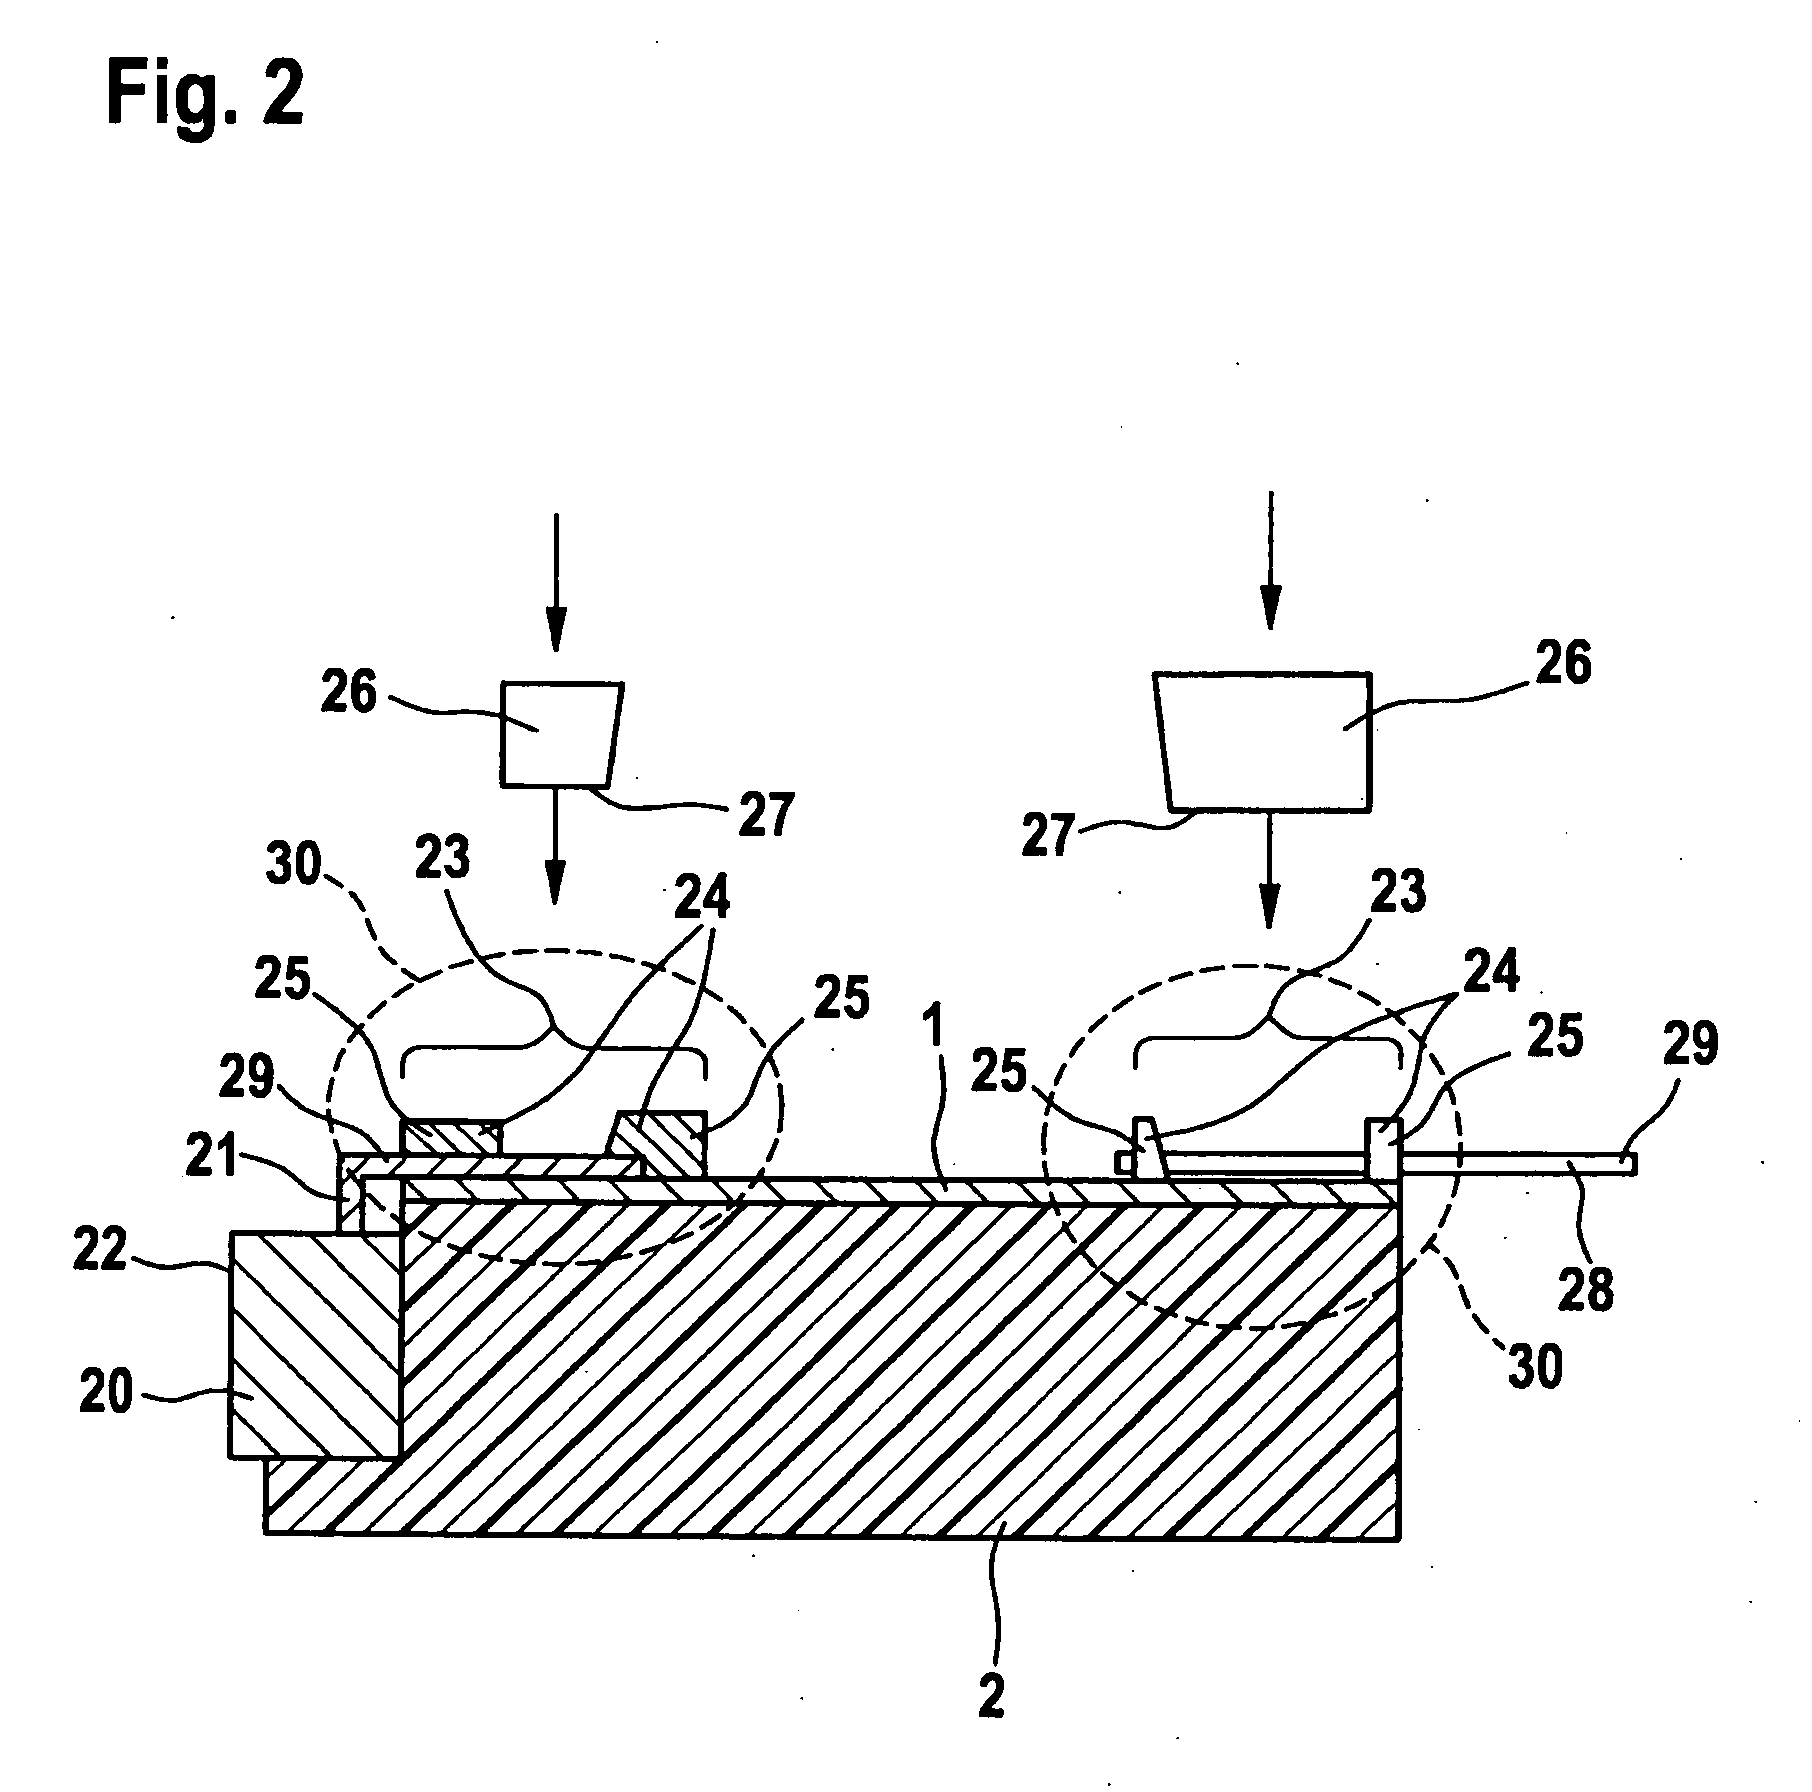 Method for producing an electrically conductive path on a plastic component